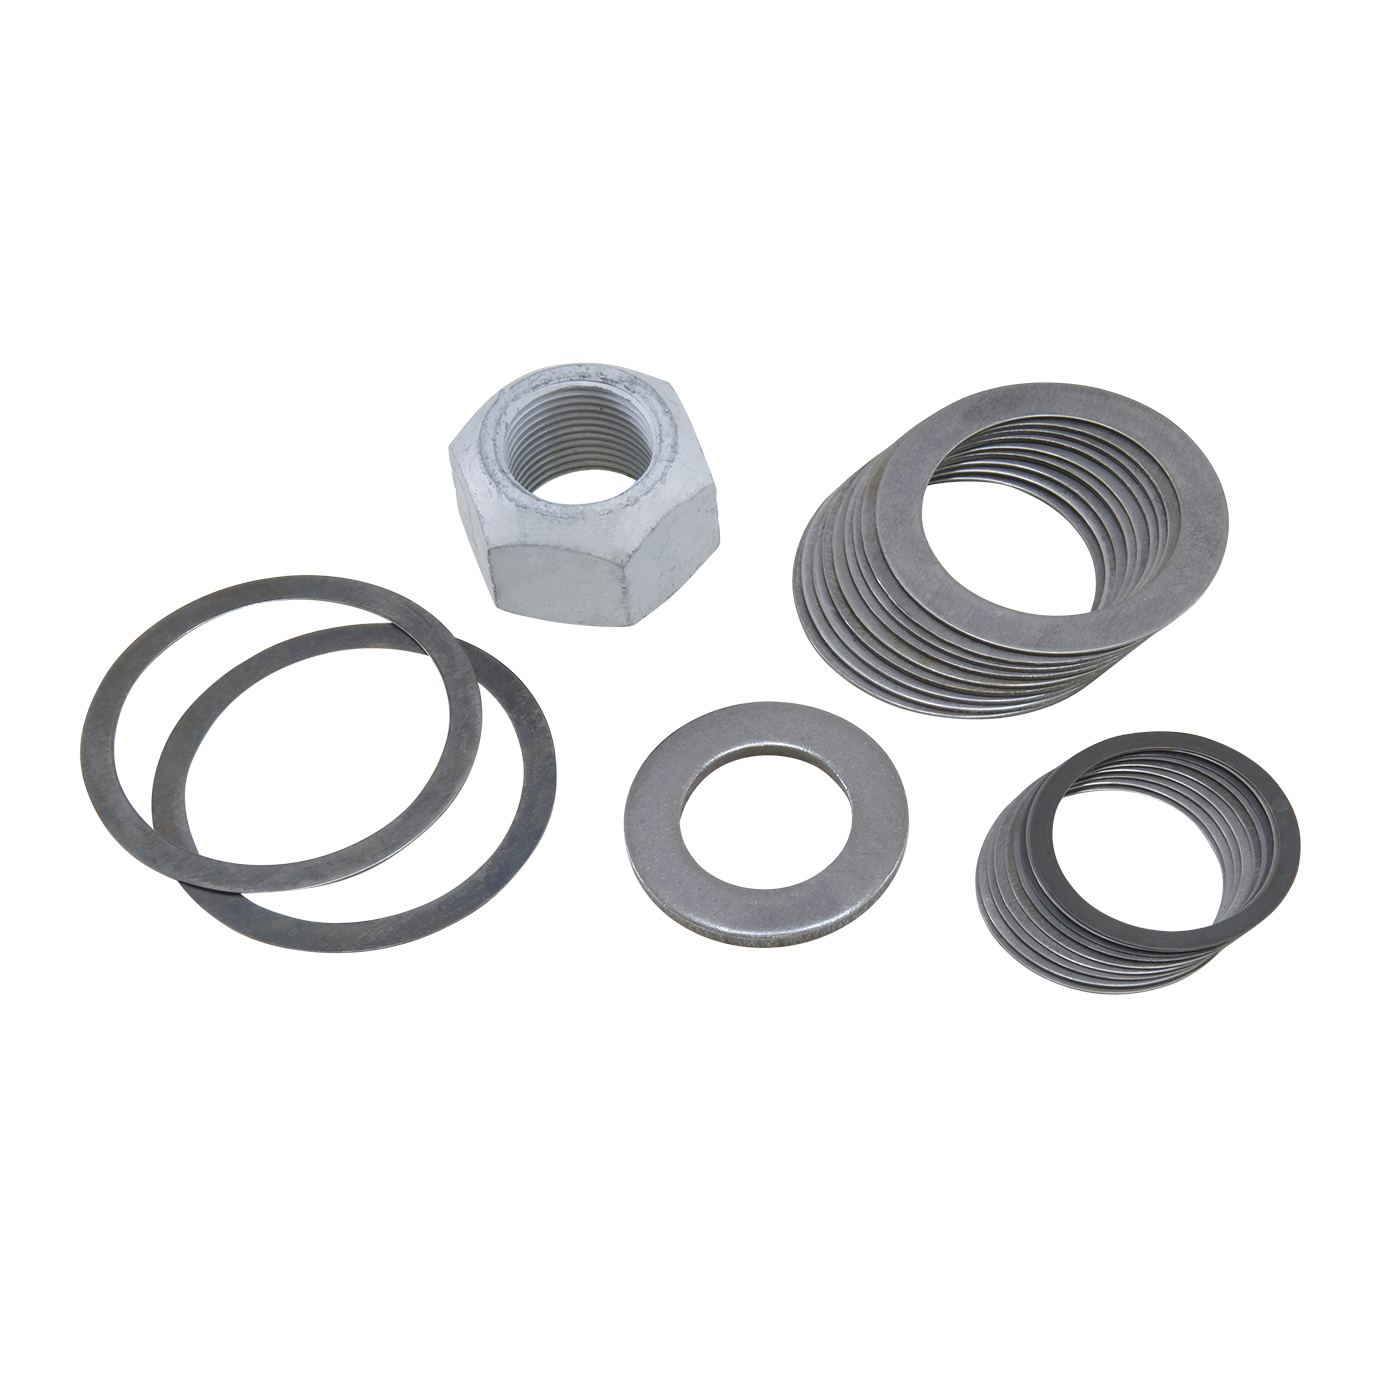 Replacement shim kit for Dana 80 